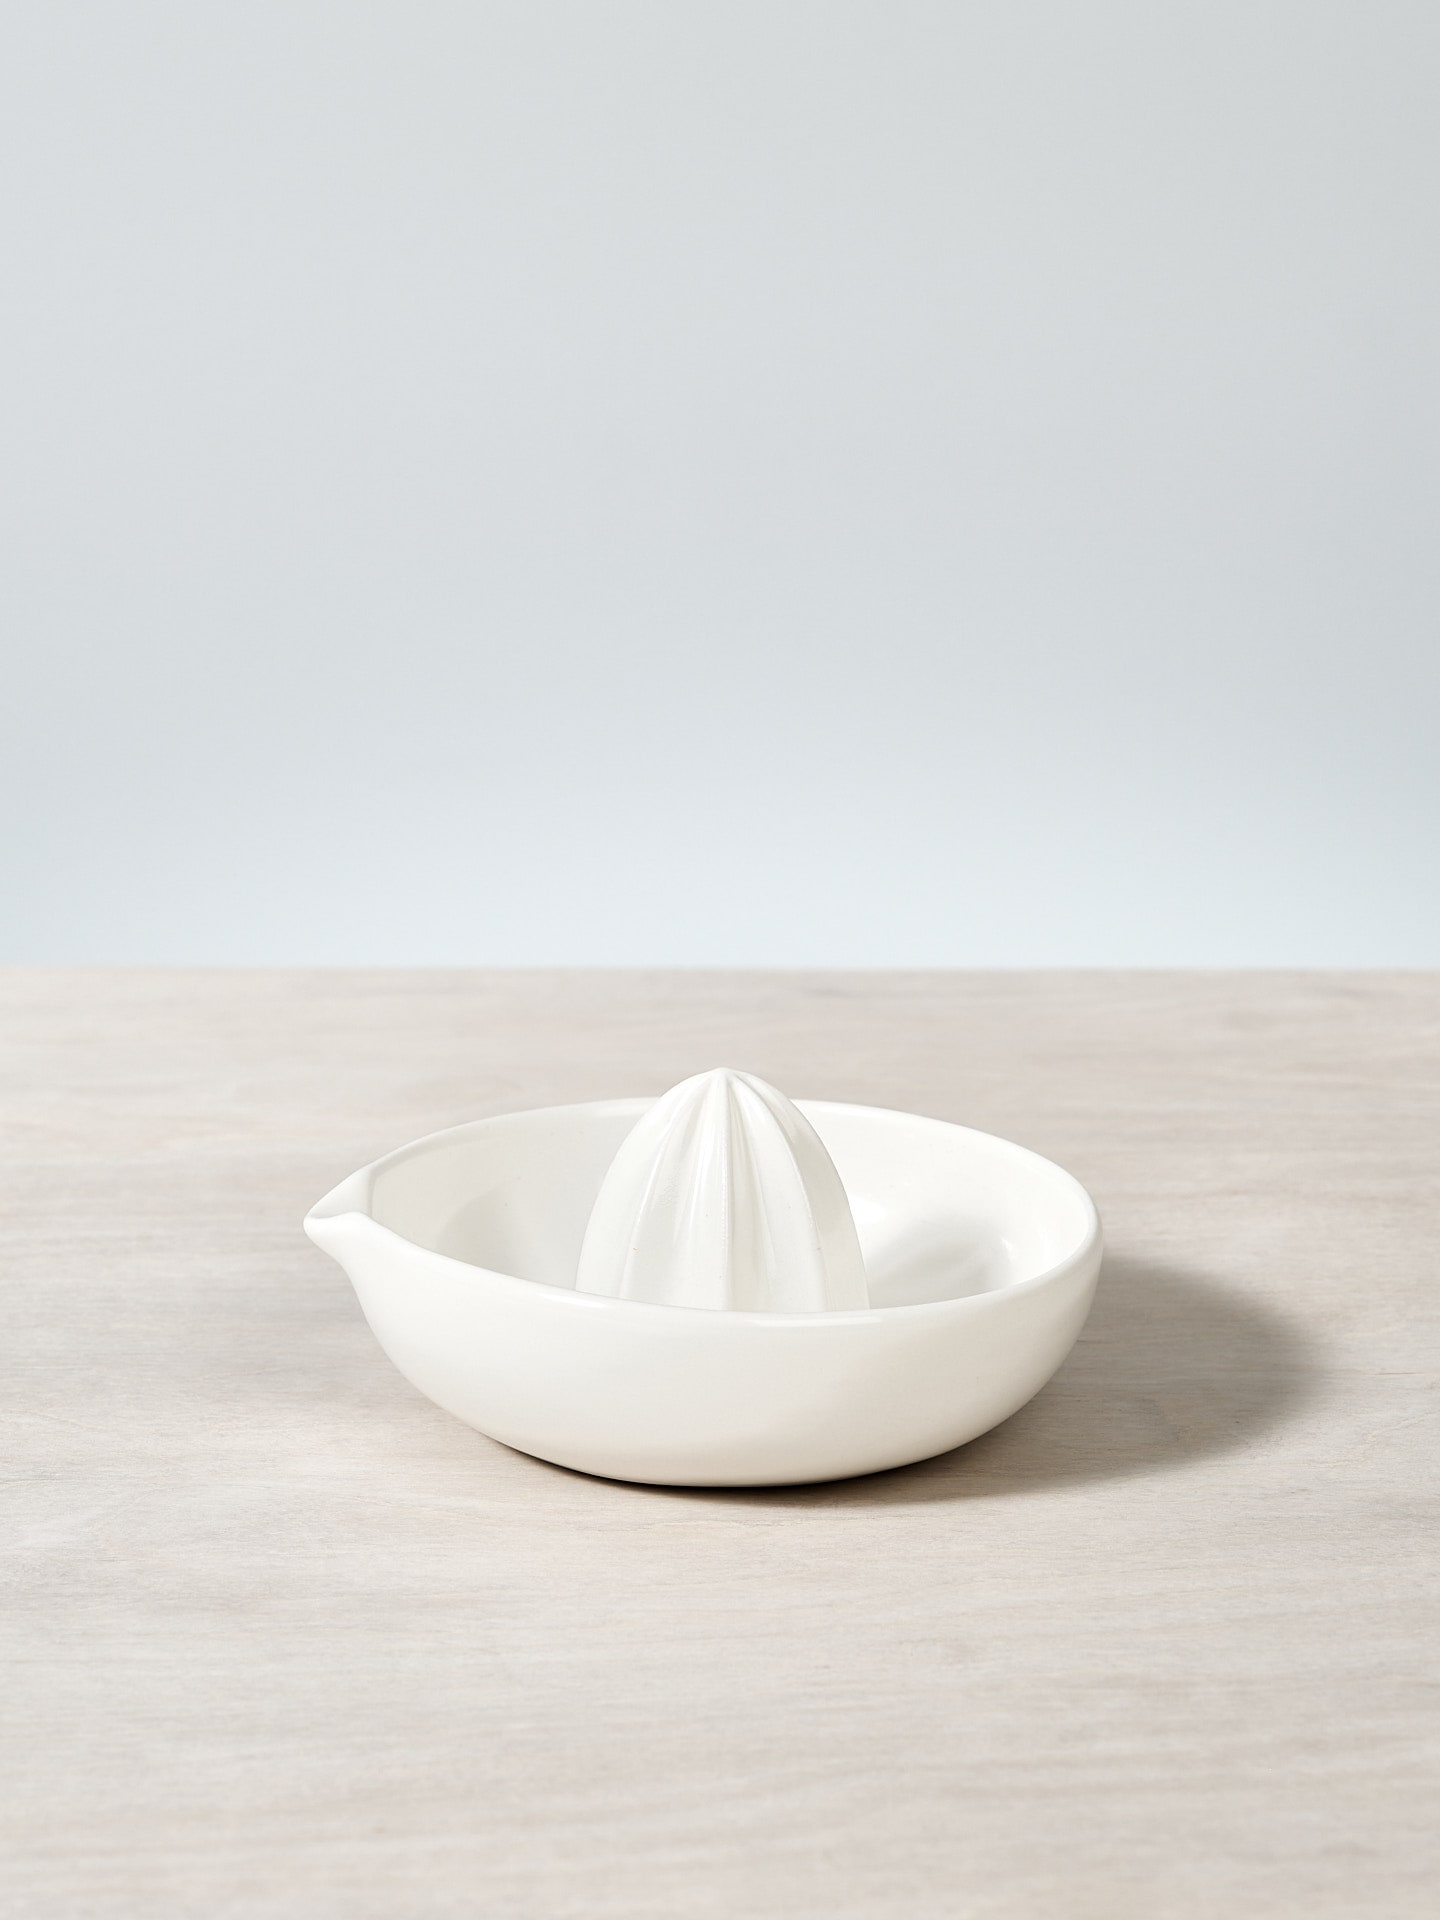 A Citrus Juicer – Satin White by Gidon Bing sitting on top of a wooden table.